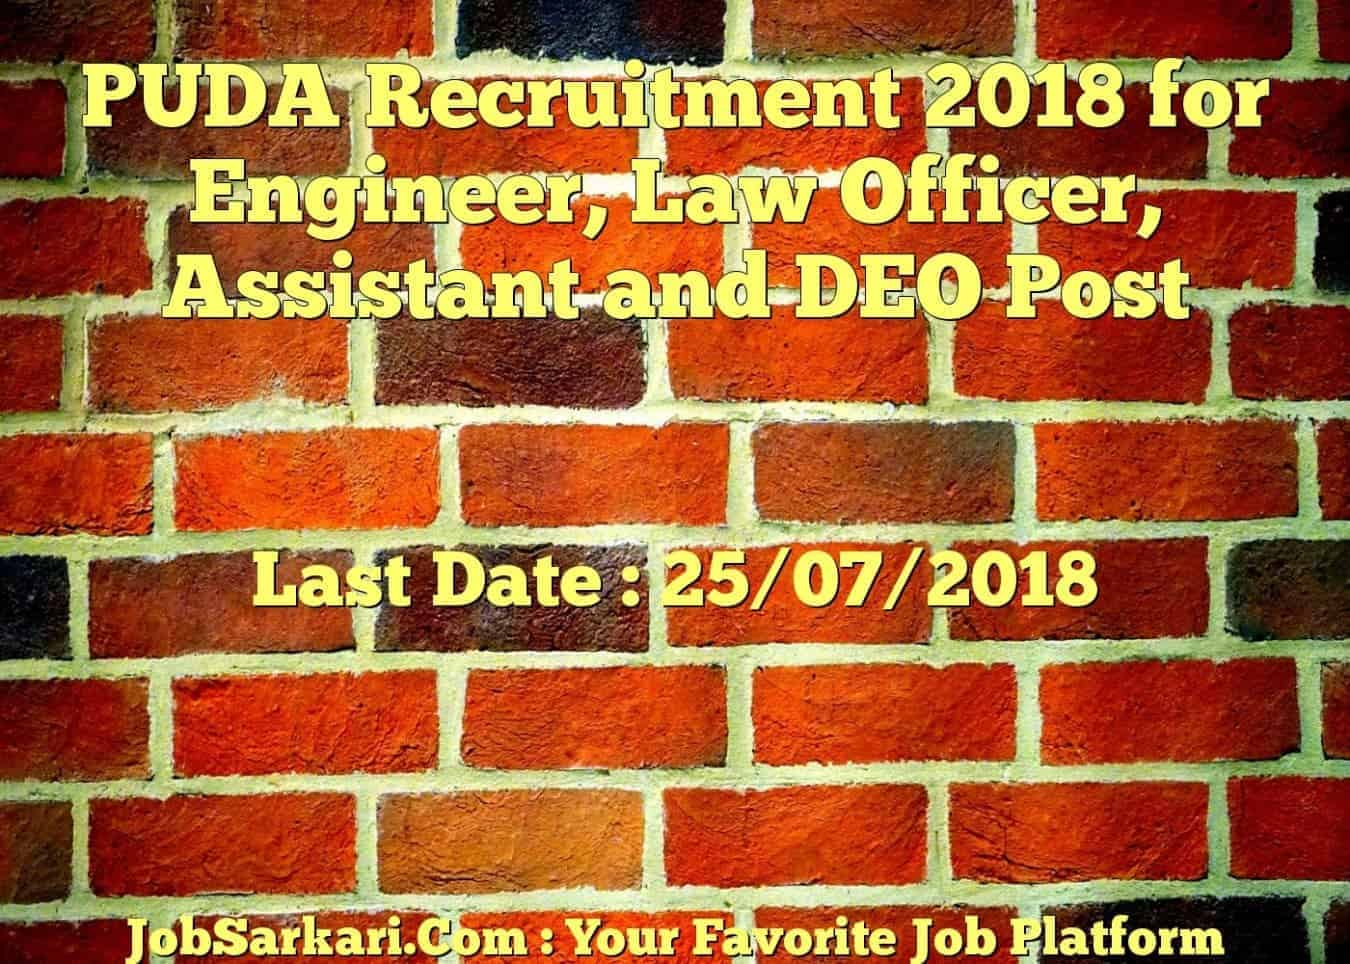 PUDA Recruitment 2018 for Engineer, Law Officer, Assistant and DEO Post